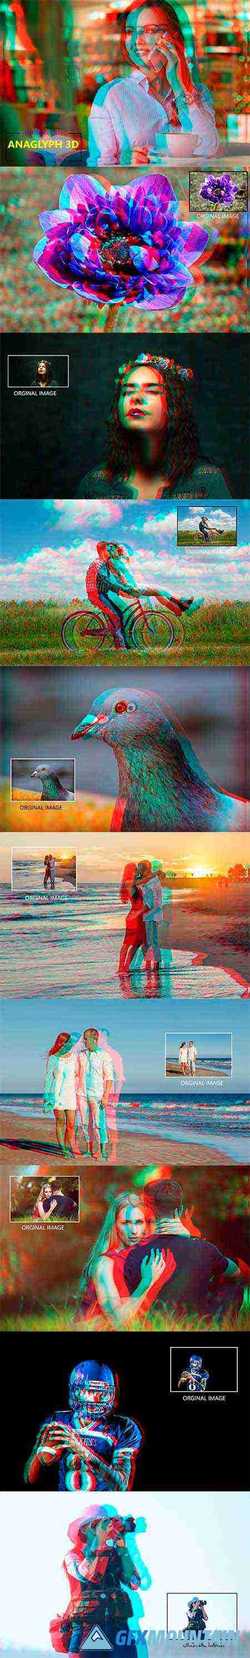 Anaglyph 3D - Photoshop Action 1760822